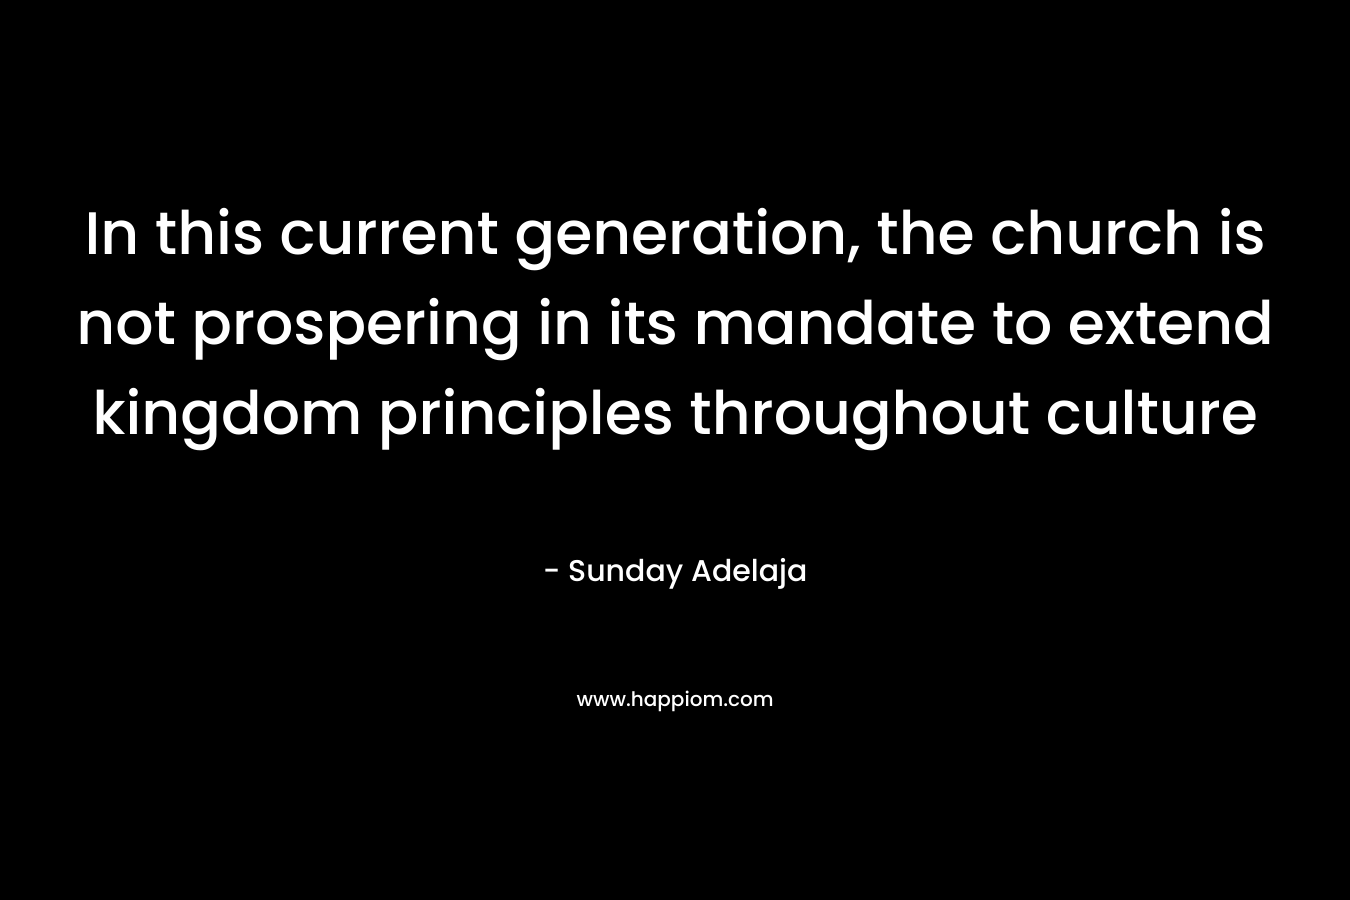 In this current generation, the church is not prospering in its mandate to extend kingdom principles throughout culture – Sunday Adelaja